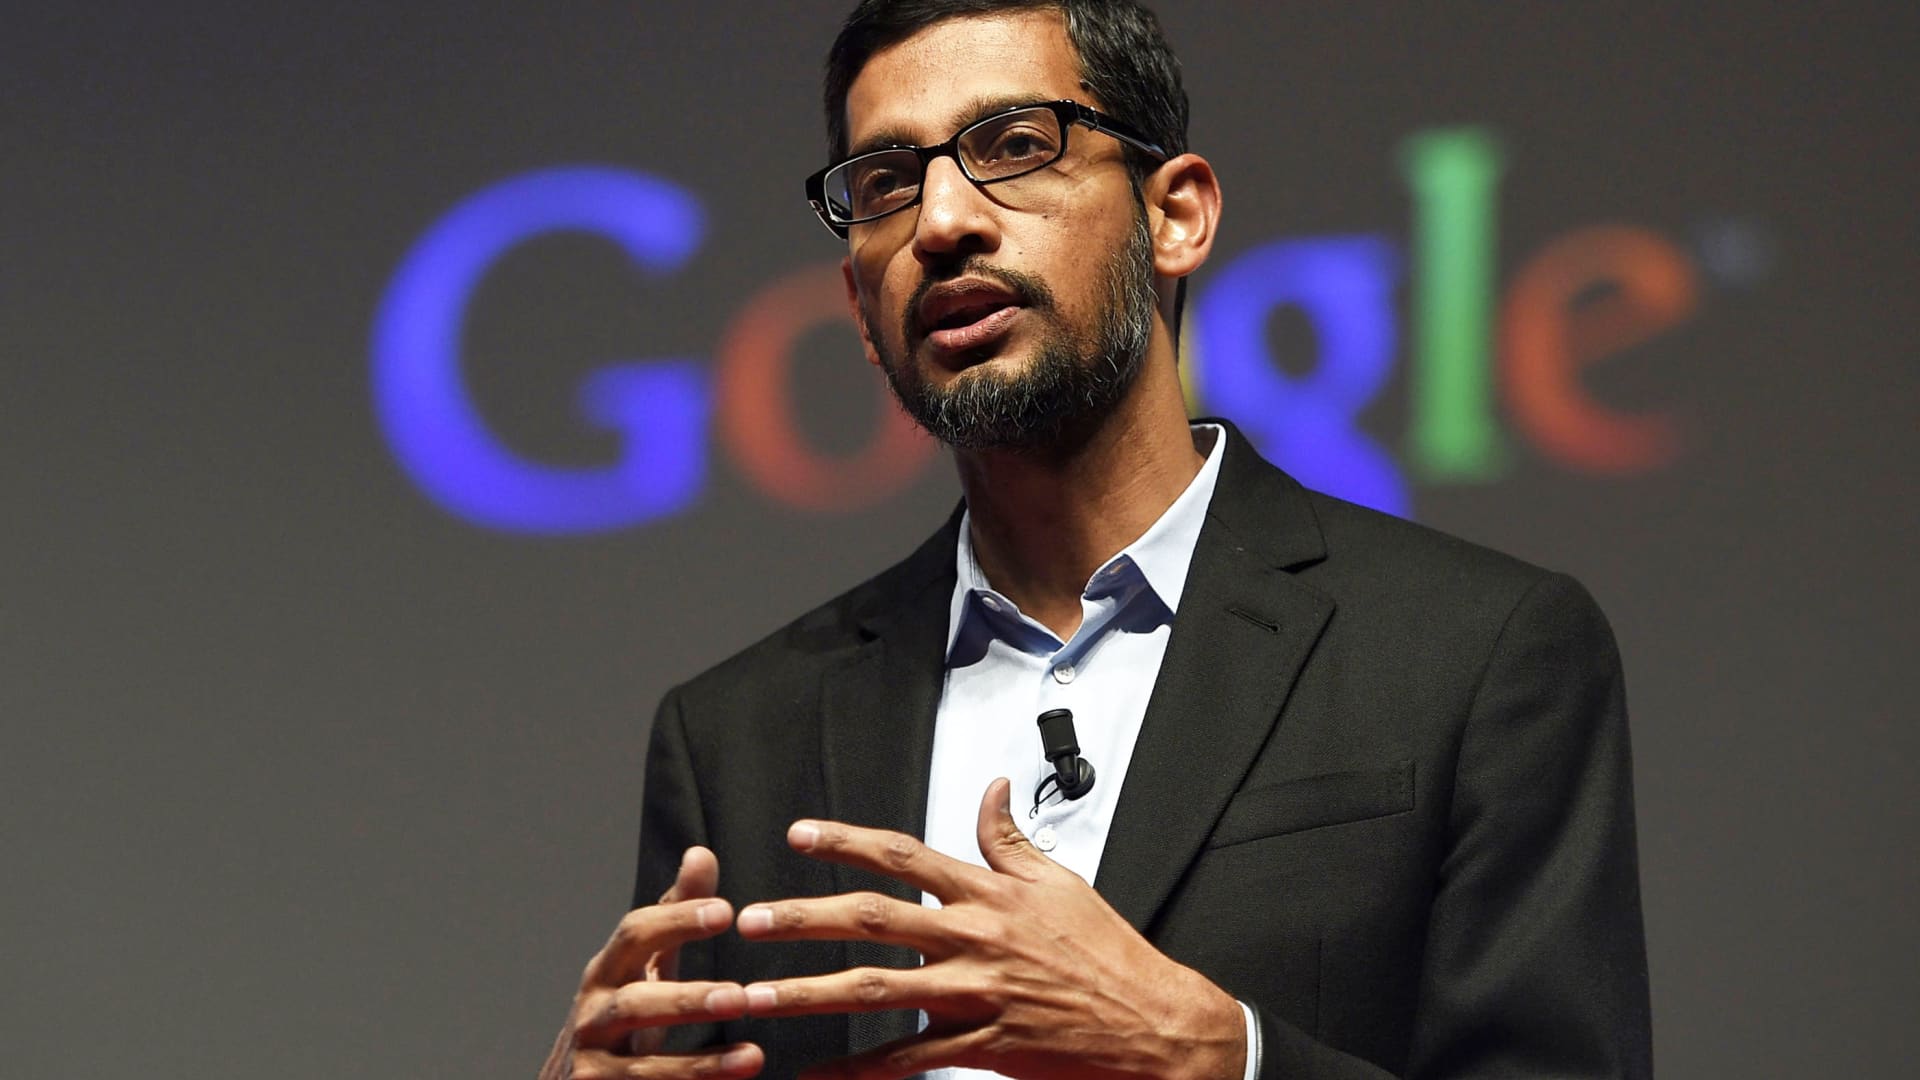 Google employees bombard execs with questions about pay at recent all-hands meeting - CNBC